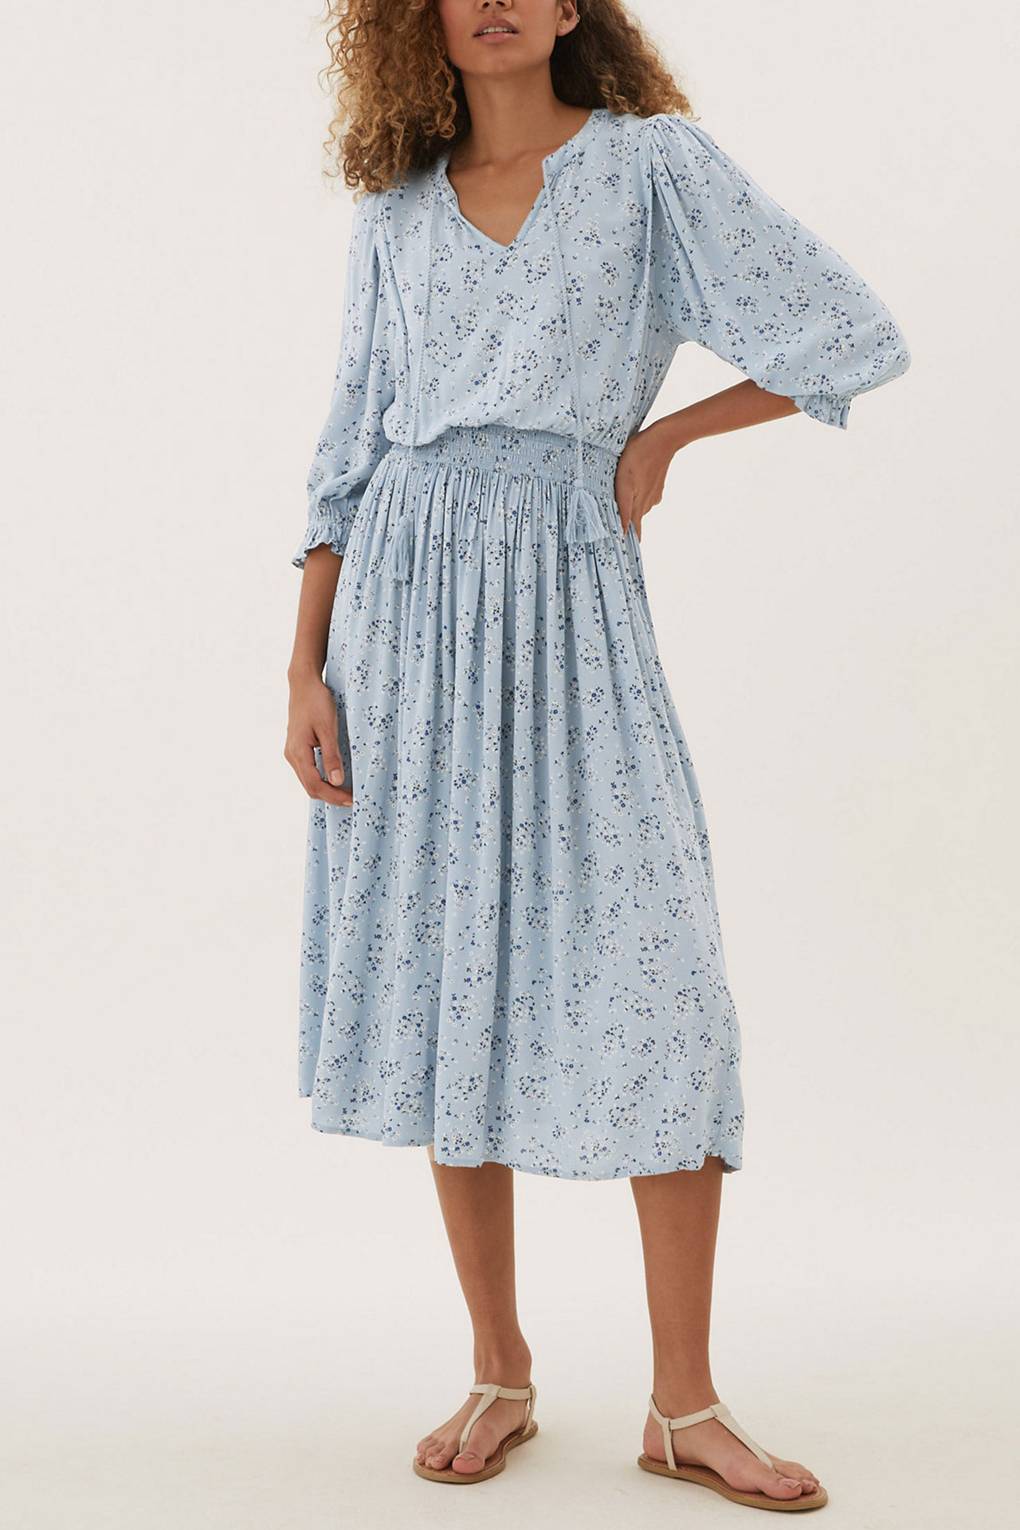 Marks & Spencer's New Summer Dress Collection Is Seriously Epic